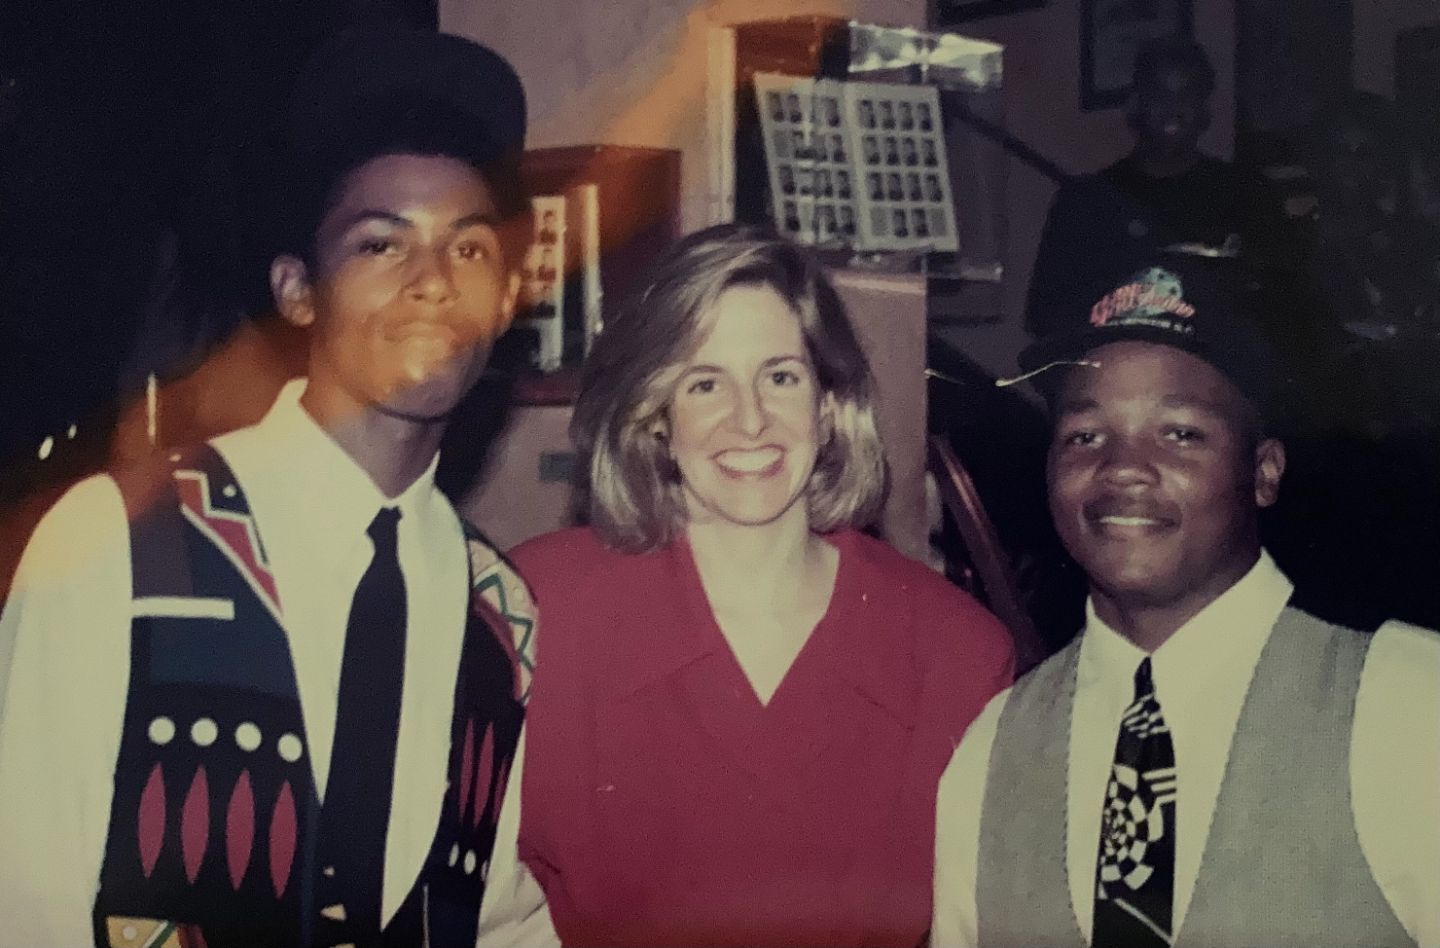 LCA! founder/executive director Allison Silberberg with two of her LCA! participants, Rayvon Hicks and Robby Preston, at the premiere of their film, "Poppy," at the American Film Institute at The Kennedy Center in 1995. The LCA! students received a standing ovation from the sold-out crowd.